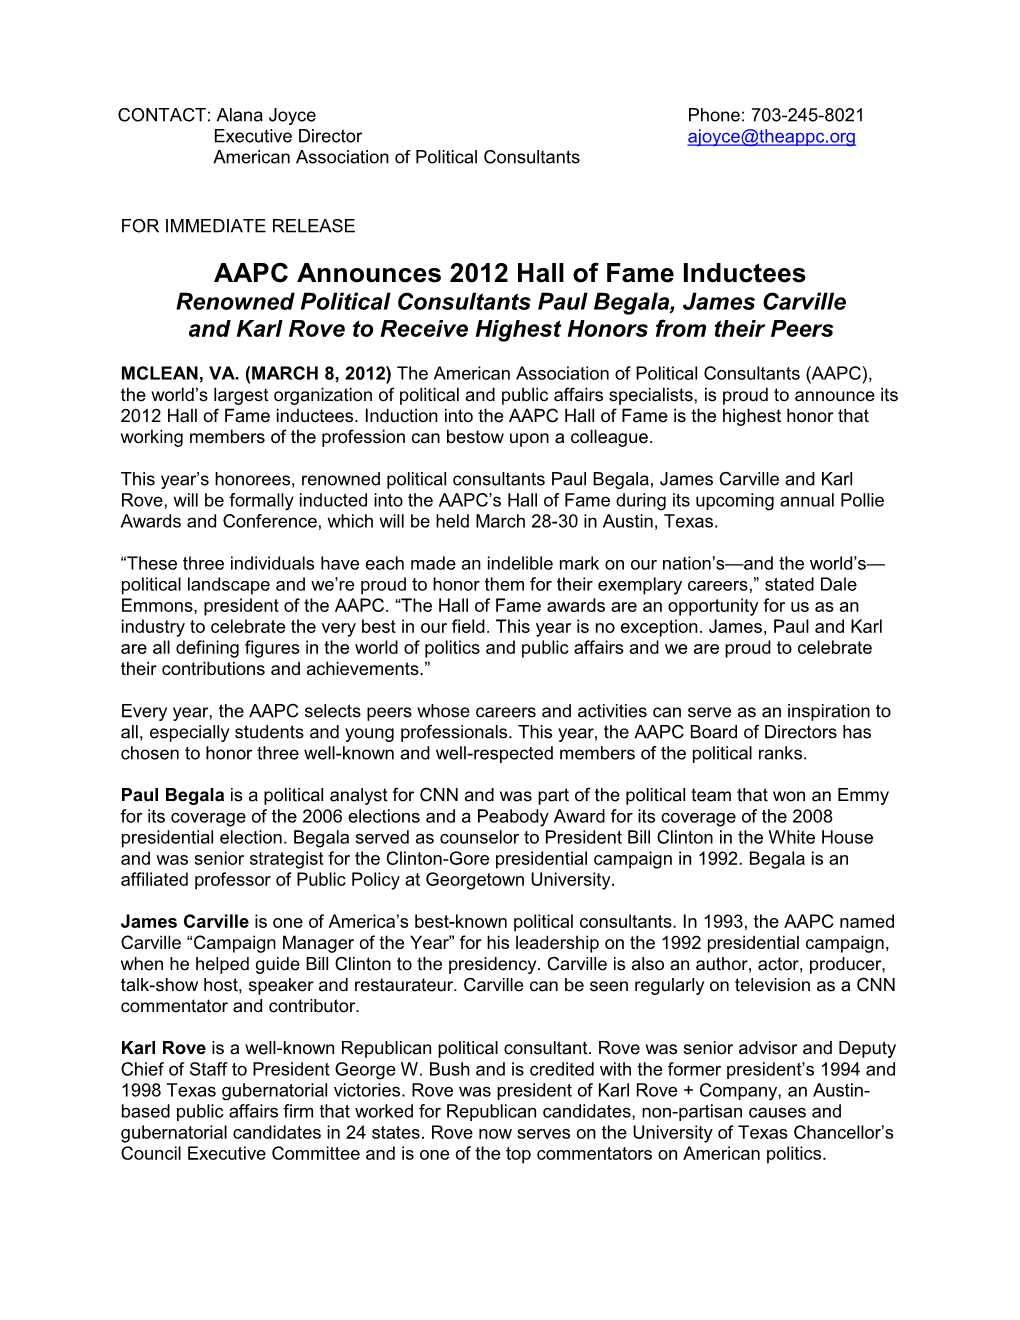 AAPC Announces 2012 Hall of Fame Inductees Renowned Political Consultants Paul Begala, James Carville and Karl Rove to Receive Highest Honors from Their Peers